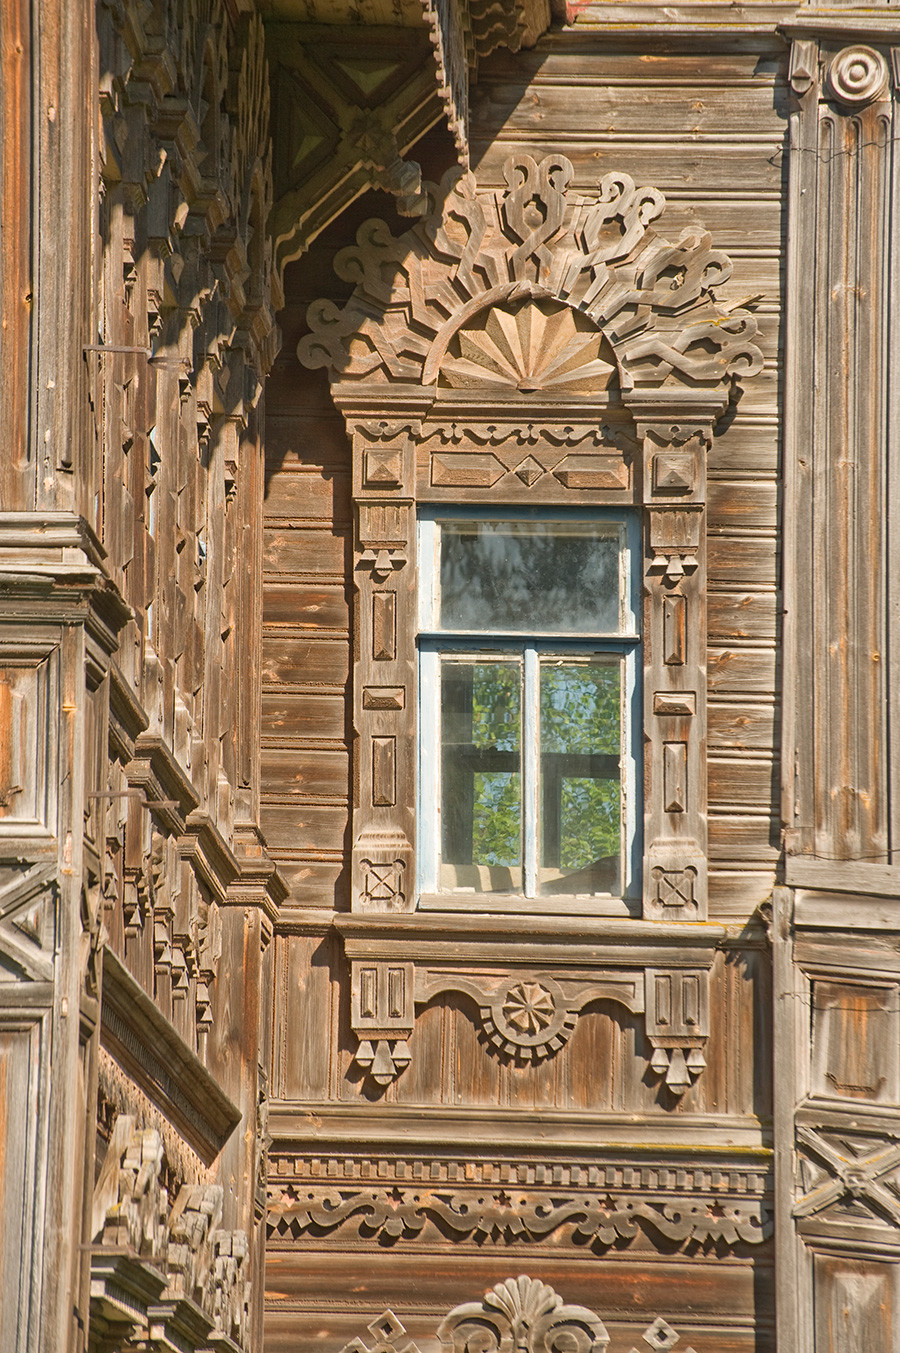 Poliashov house. Central tower, left side, window with decorative surround. May 29, 2016